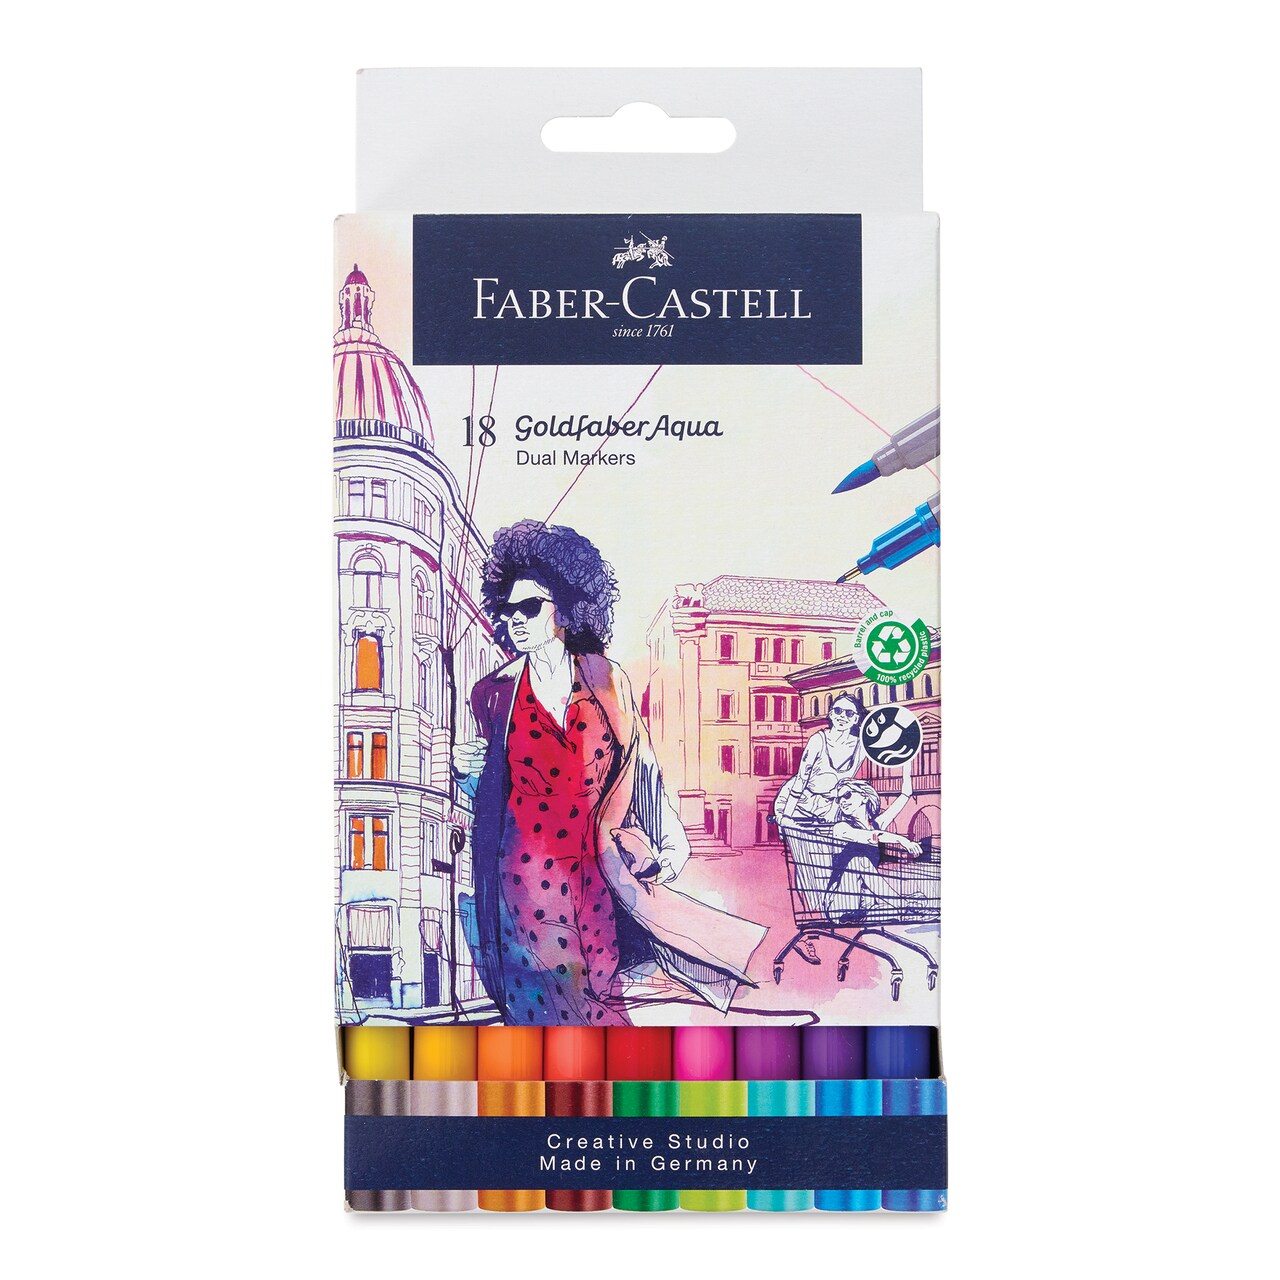 Faber-Castell Goldfaber Aqua Dual Markers - Assorted, Set of 18